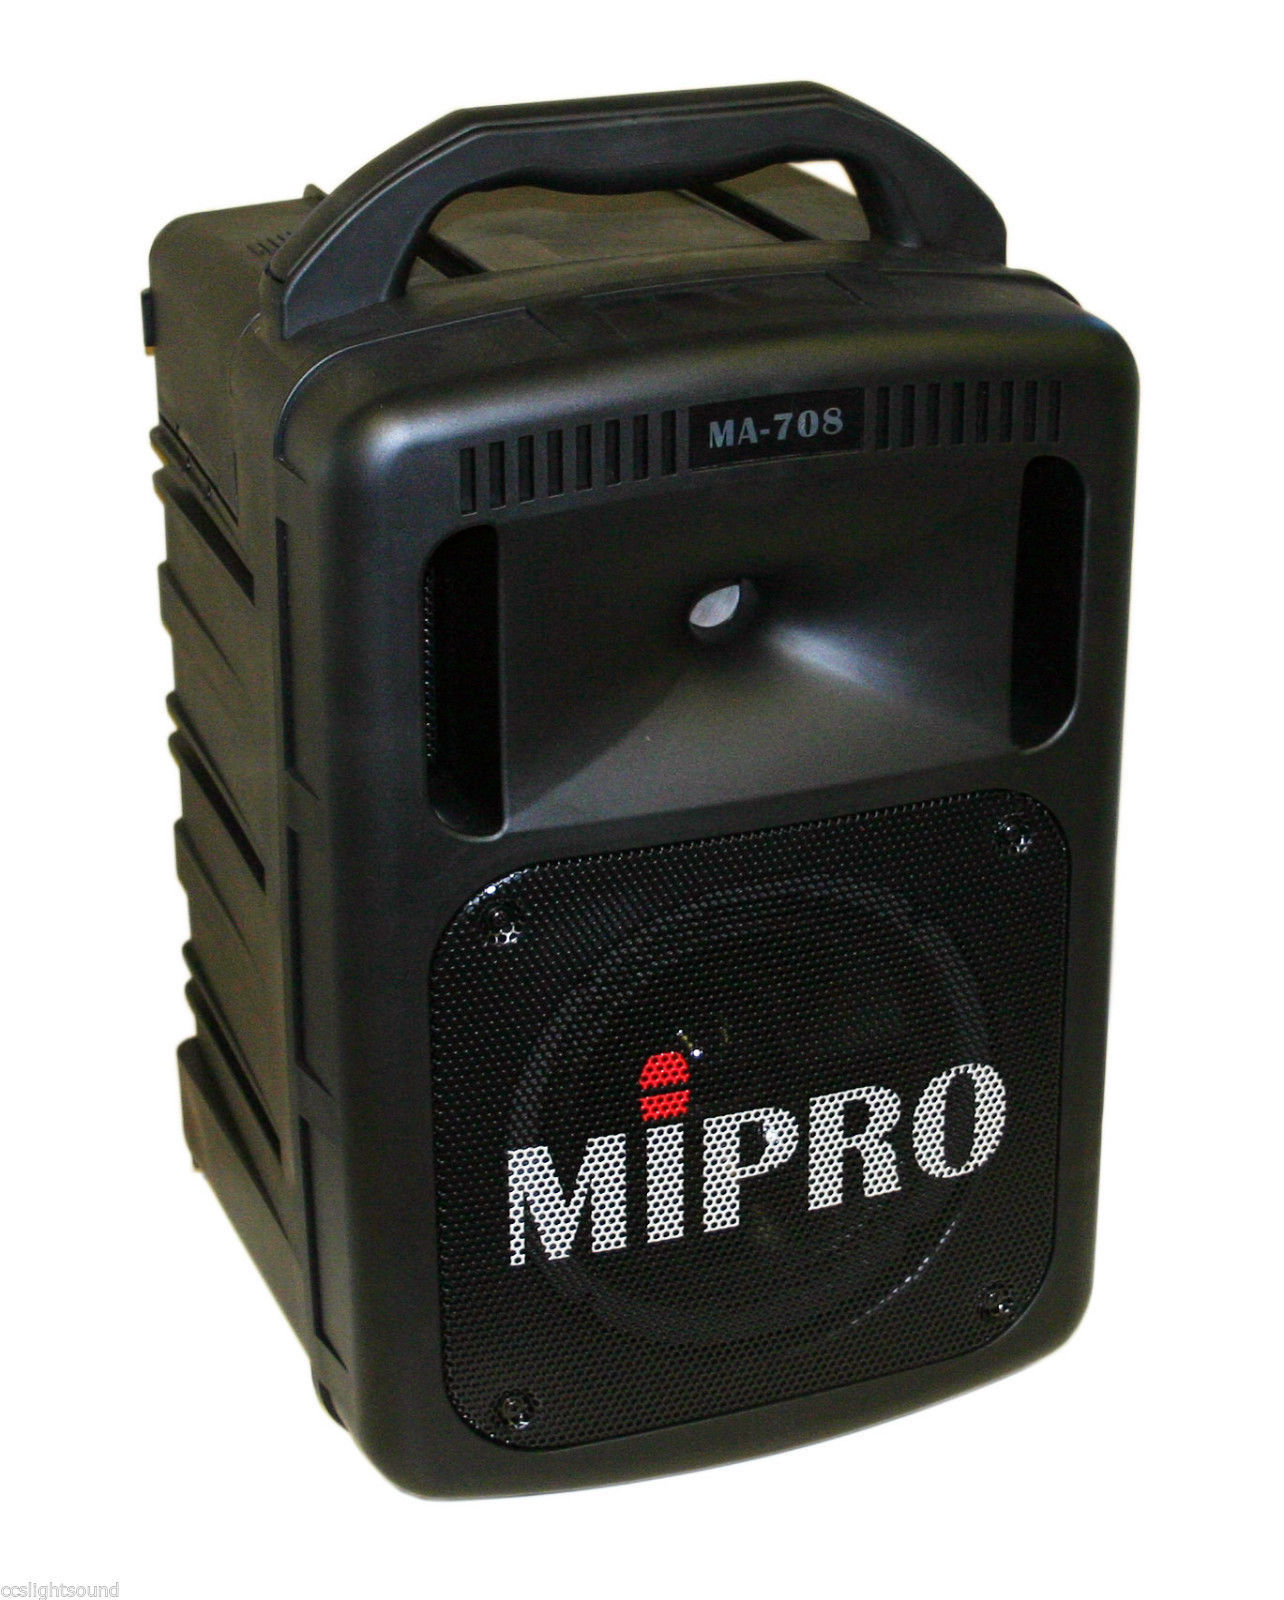 Donau Emotion Distrahere Mipro MA708-CDLH AC/DC Portable Battery PA System with CD and 2x Wireless  Microphones